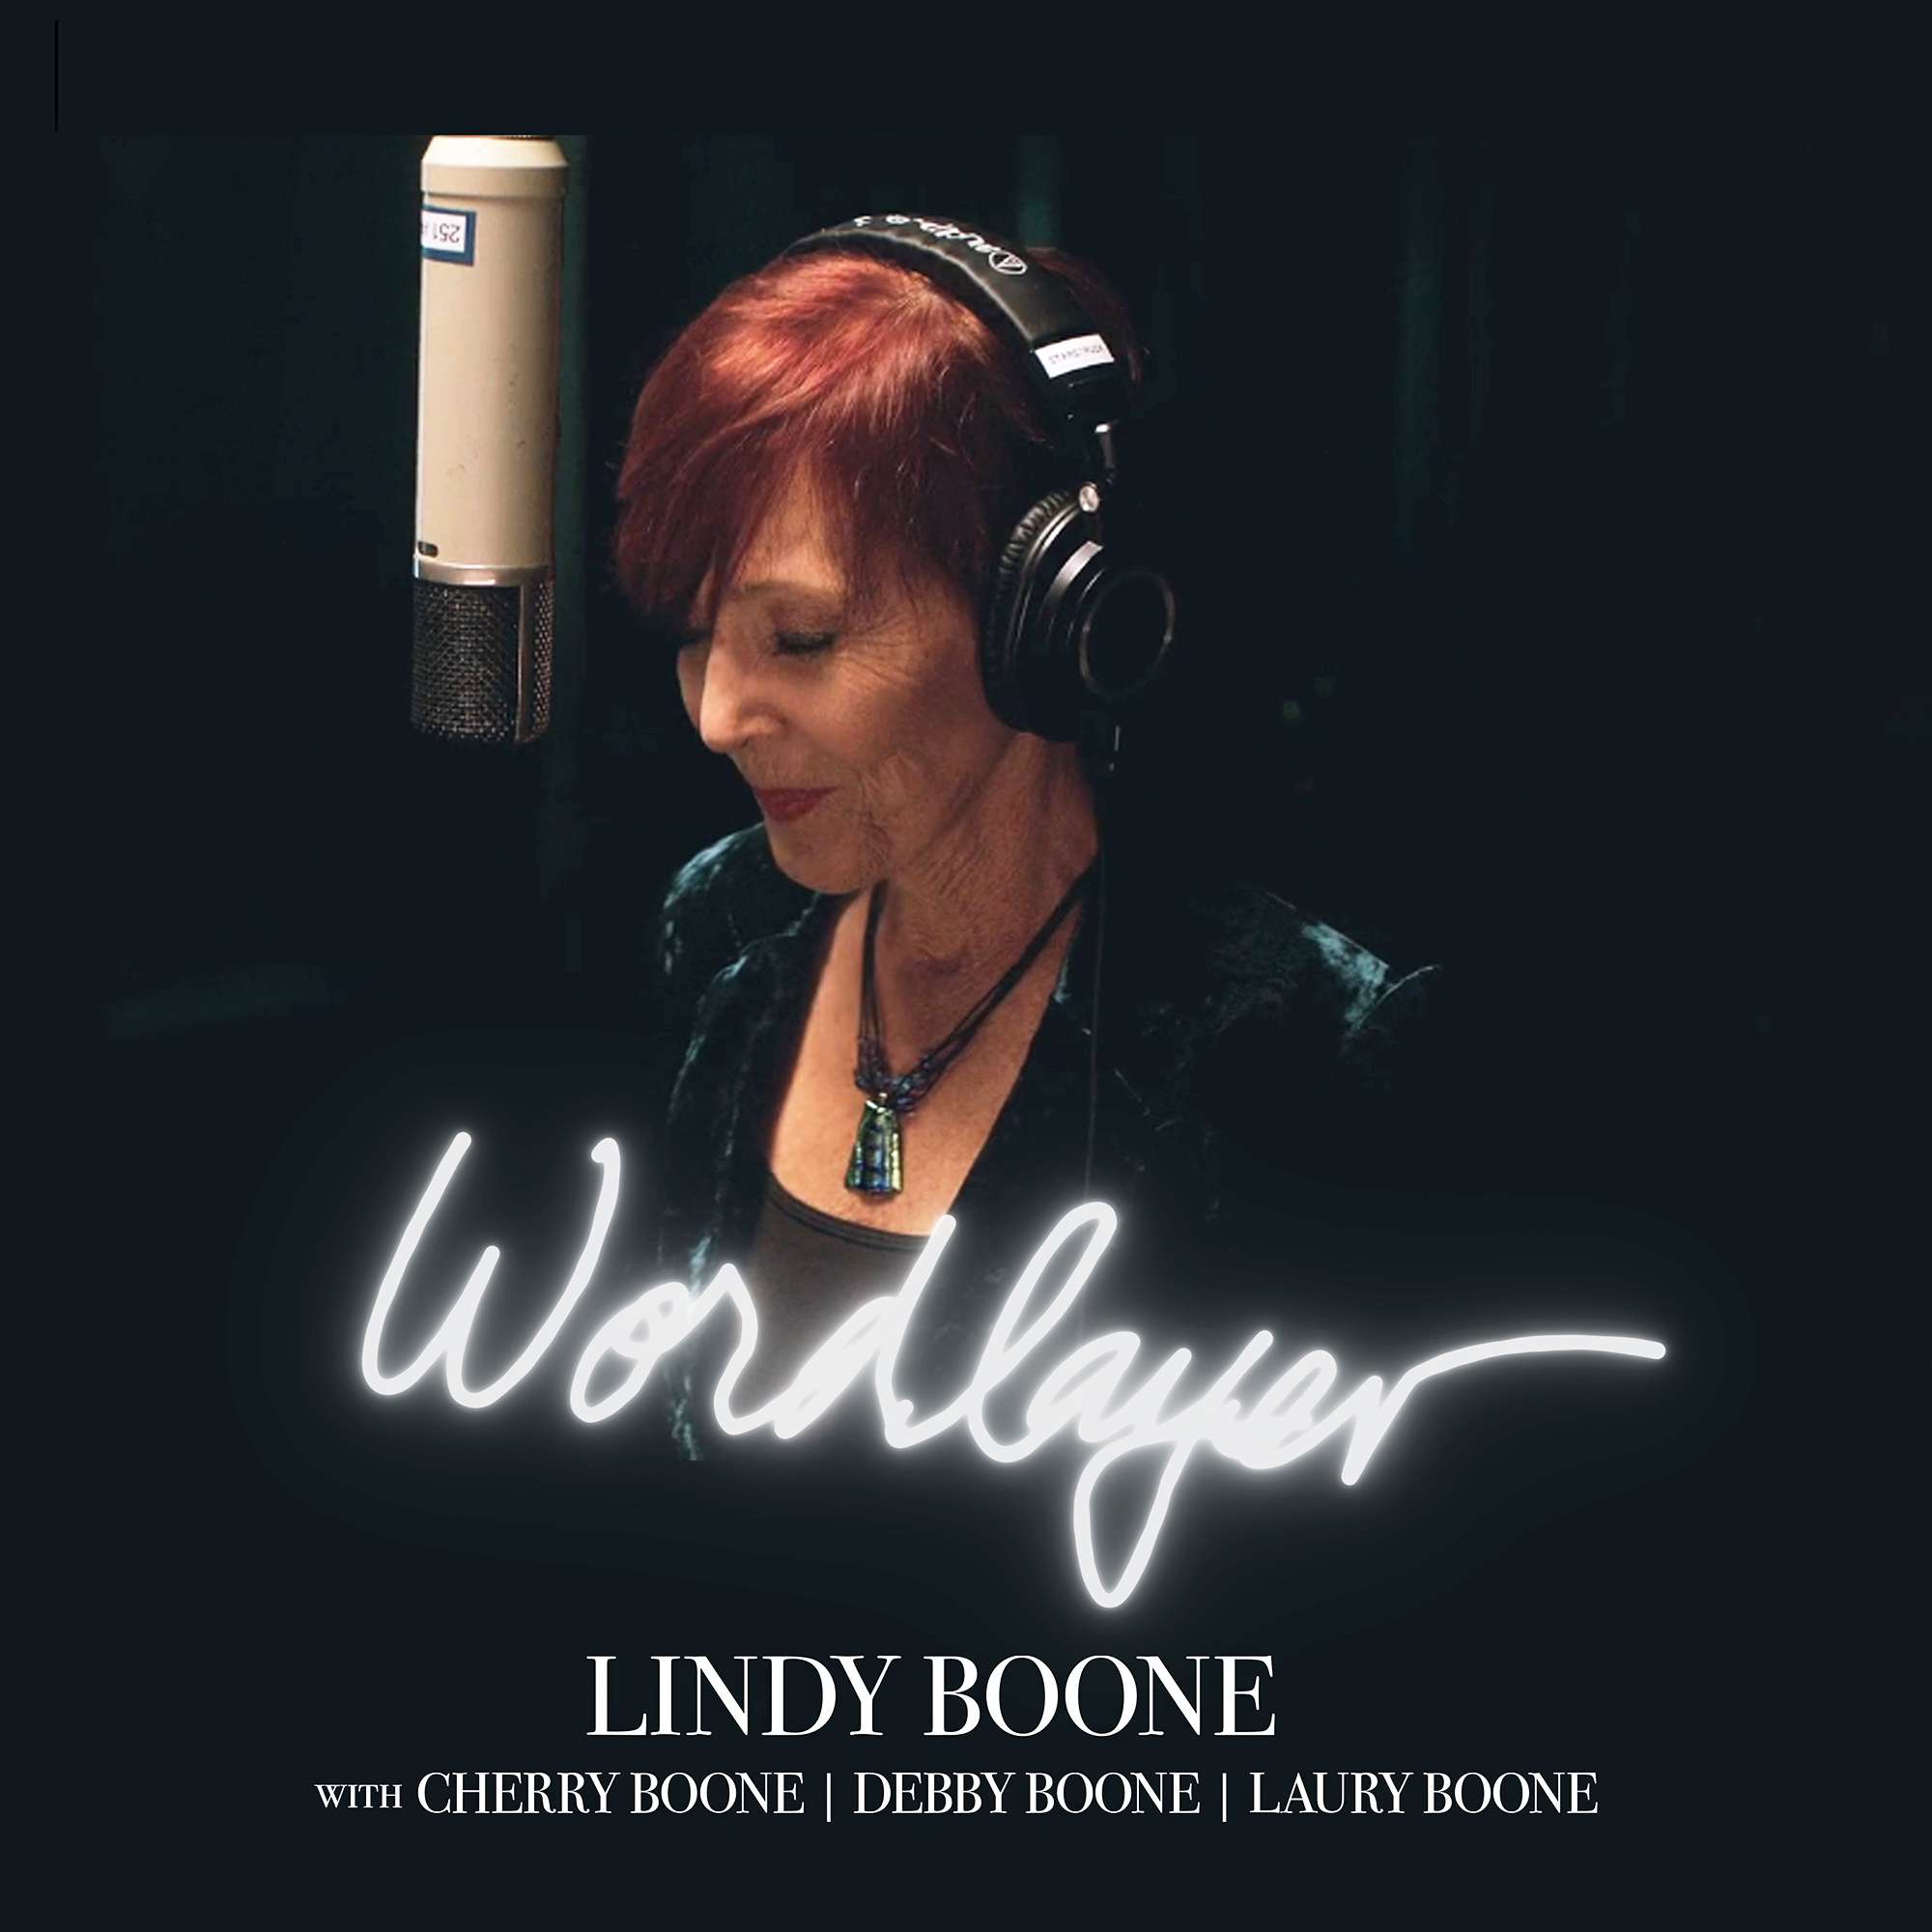 Lindy Boone Has Been in the Music Business All Her Life, But She Never Wrote a Song Until Now